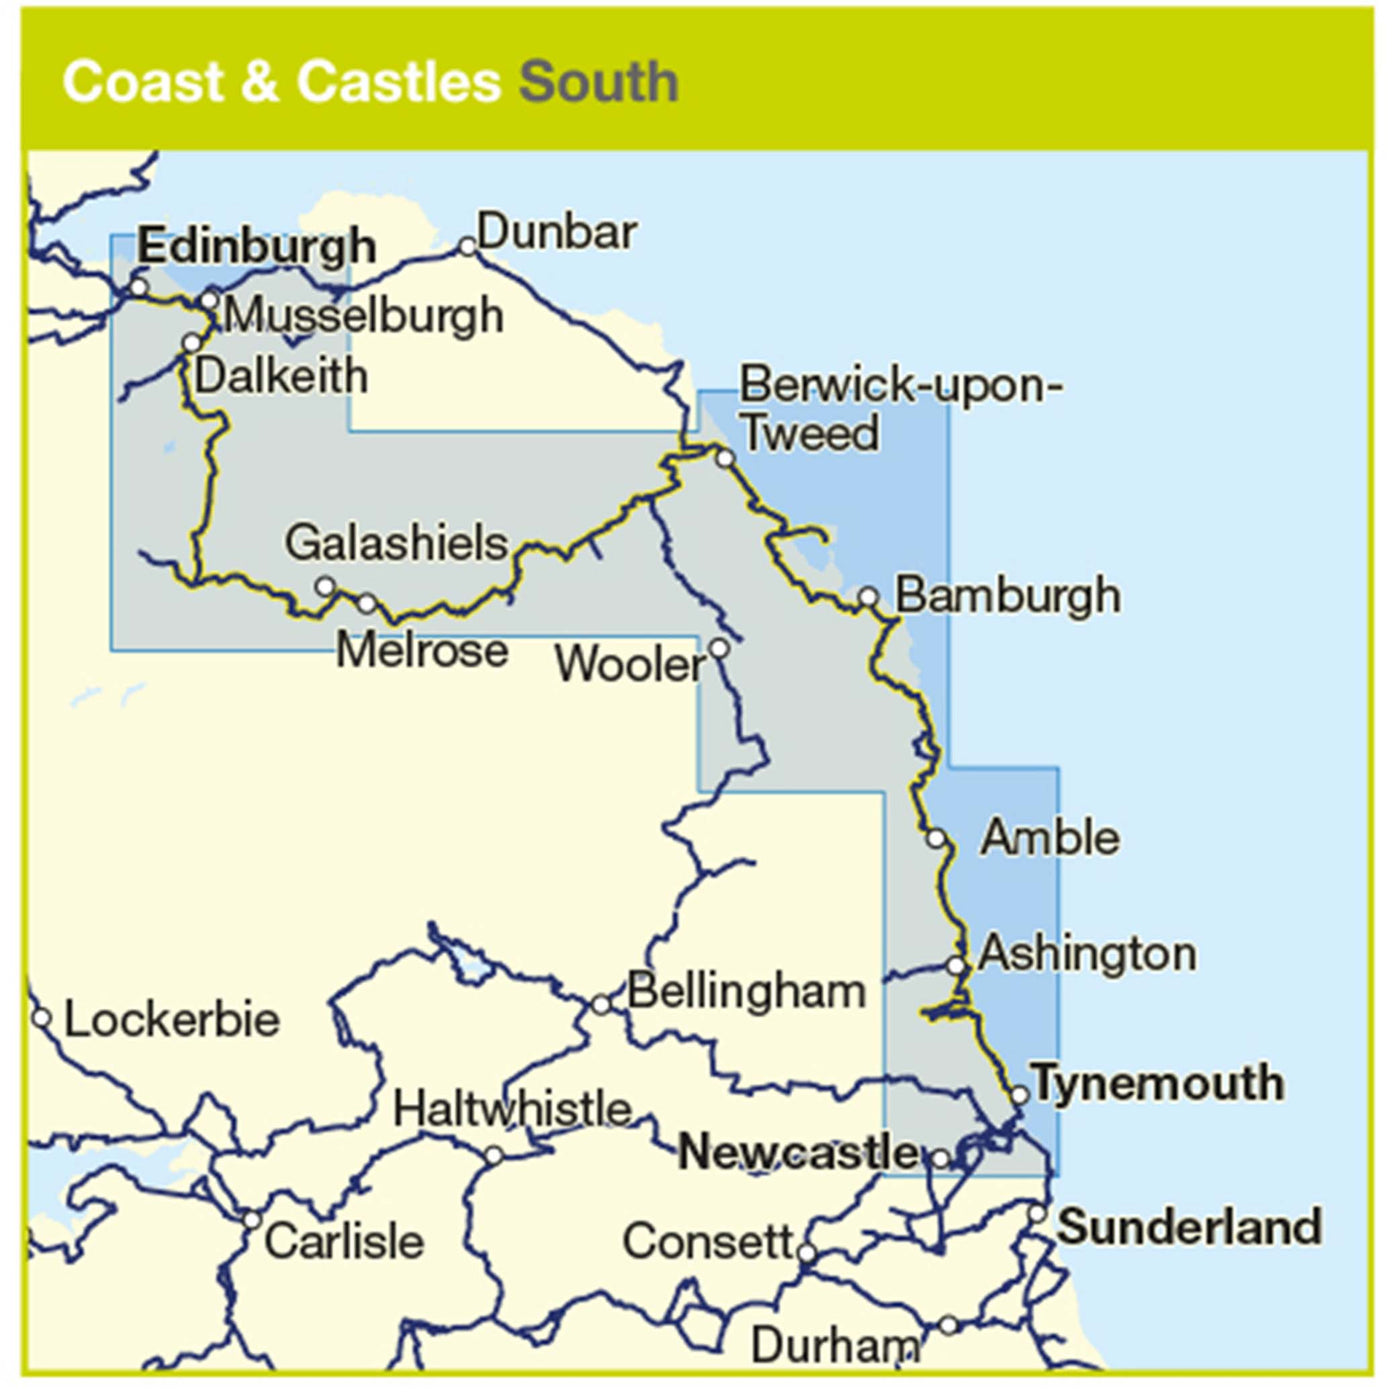 Coast and Castles South route coverage 